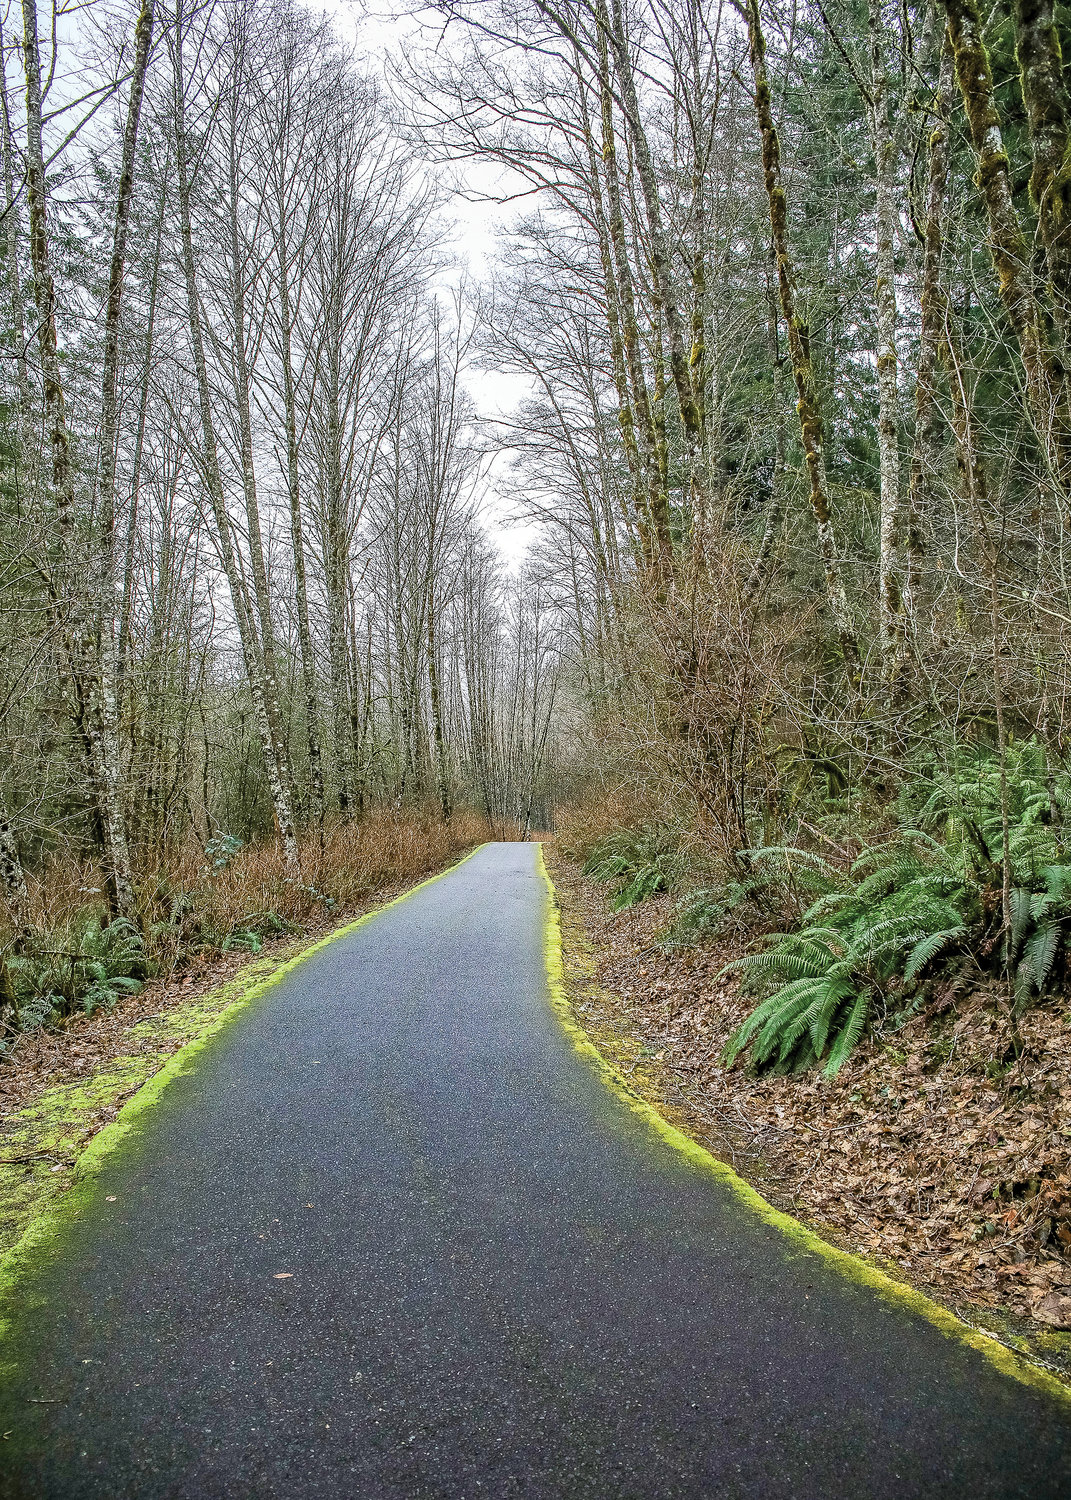 The first section of the Hantwick Trail is lined with red alder and western swordfern.